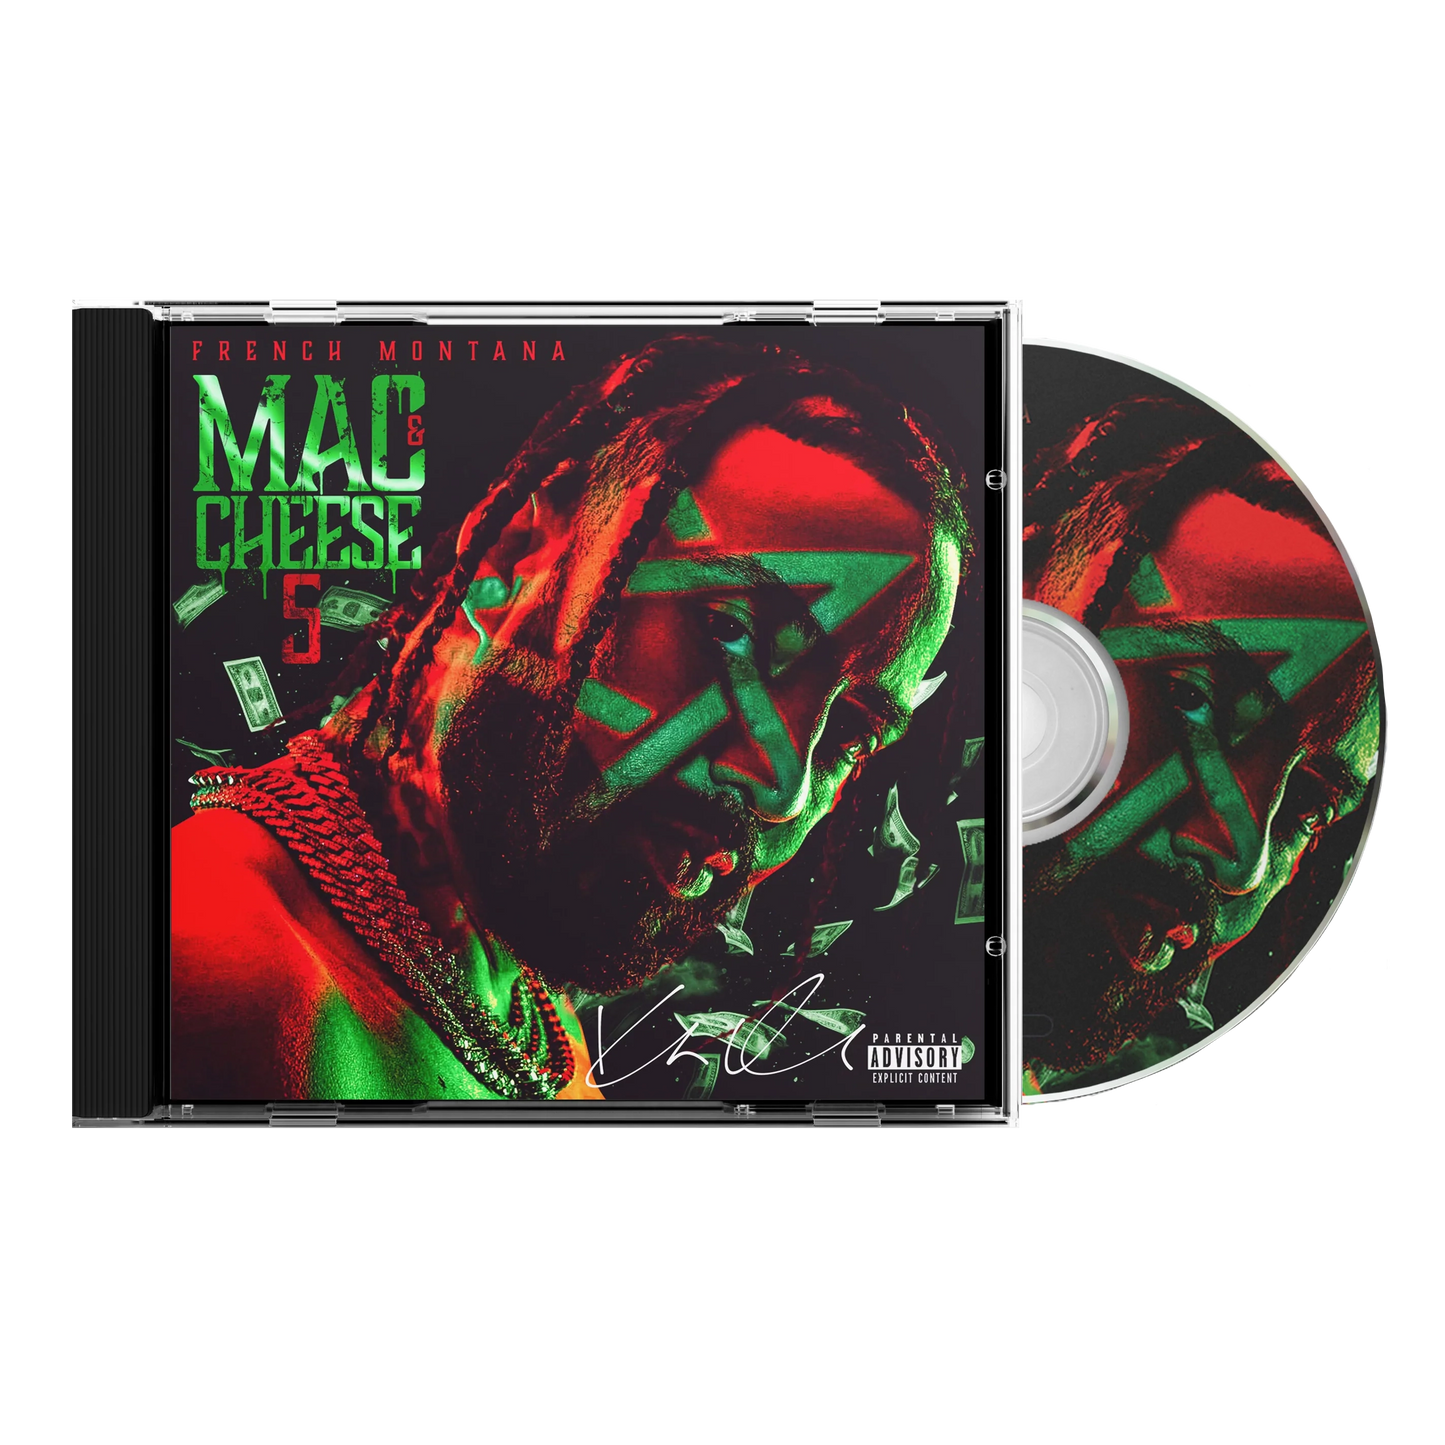 Mac & Cheese 5 - Autographed CD [#1]